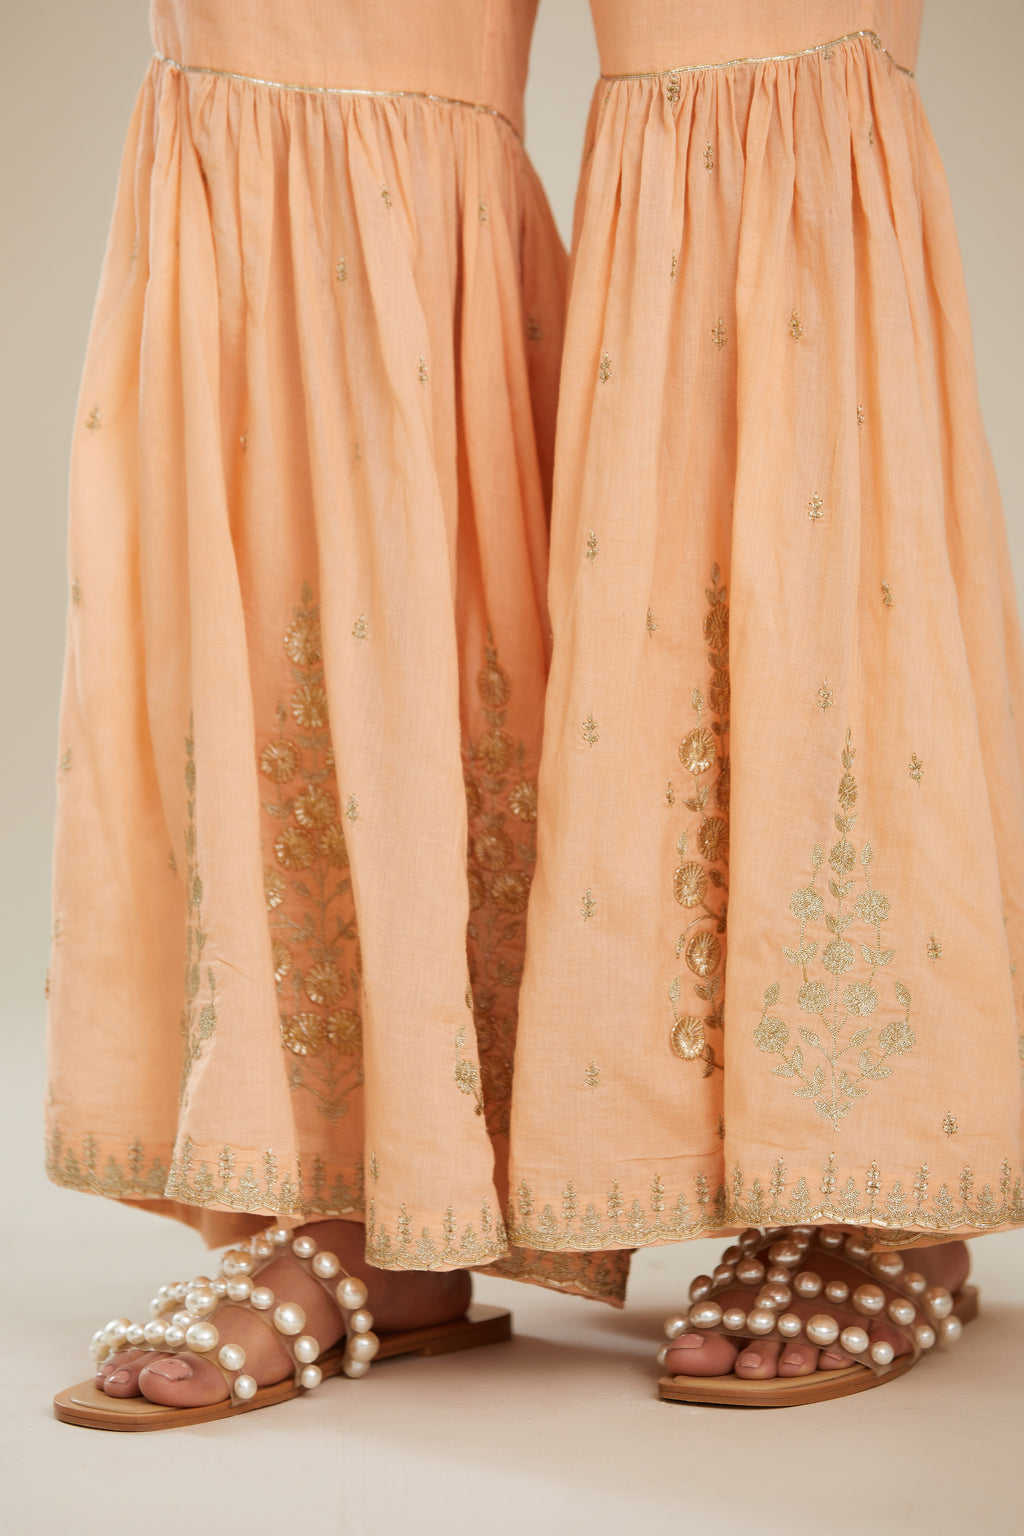 Peach farshi with gold zari and gota embroidery and gota detailing at knee joint seam. (Farshi)